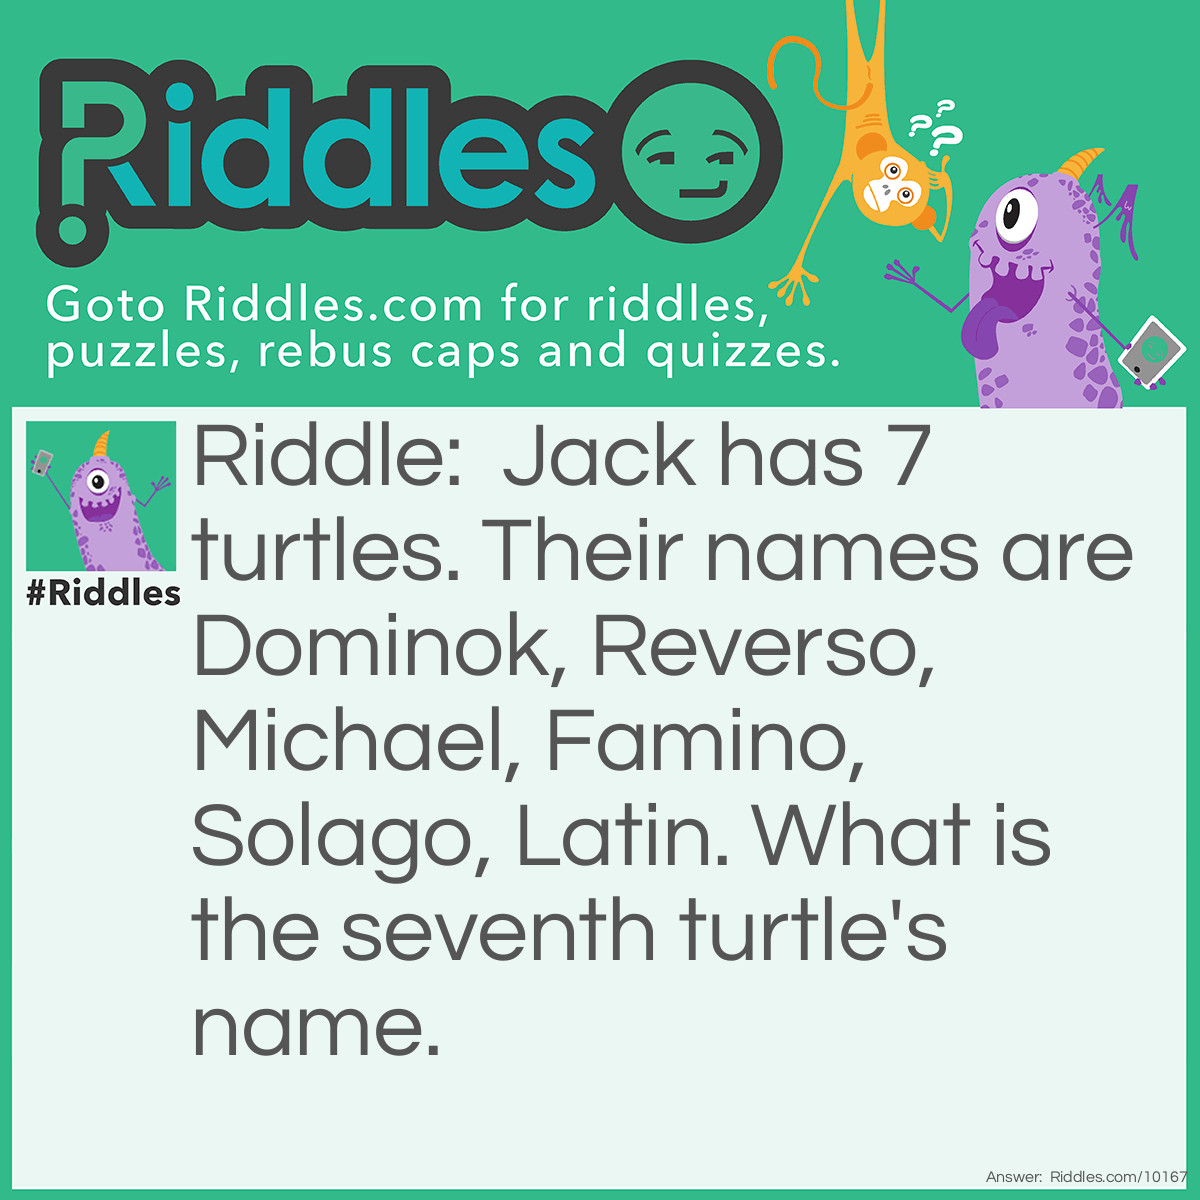 Riddle: Jack has 7 turtles. Their names are Dominok, Reverso, Michael, Famino, Solago, Latin. What is the seventh turtle's name. Answer: Timon. I guess Jack loves music so he names it based on notes